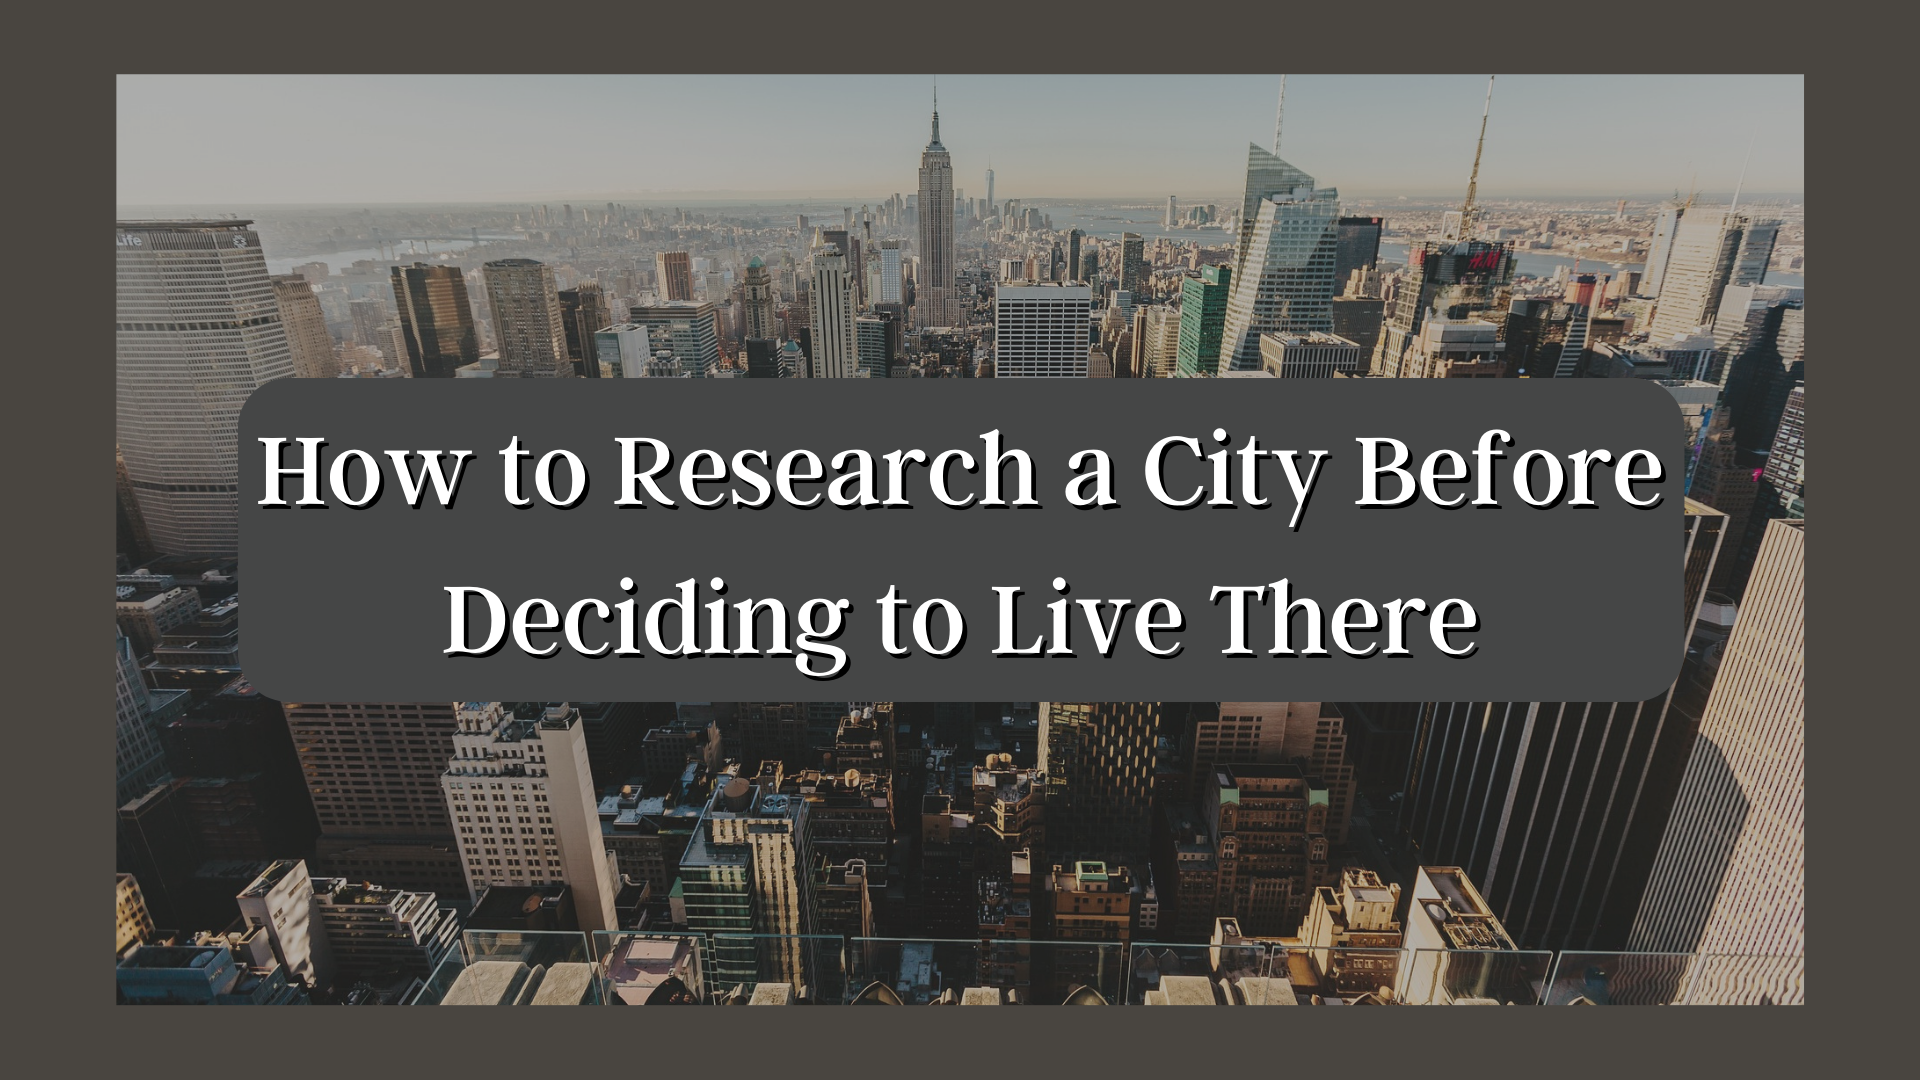 How to Research a City Before Deciding to Live There?